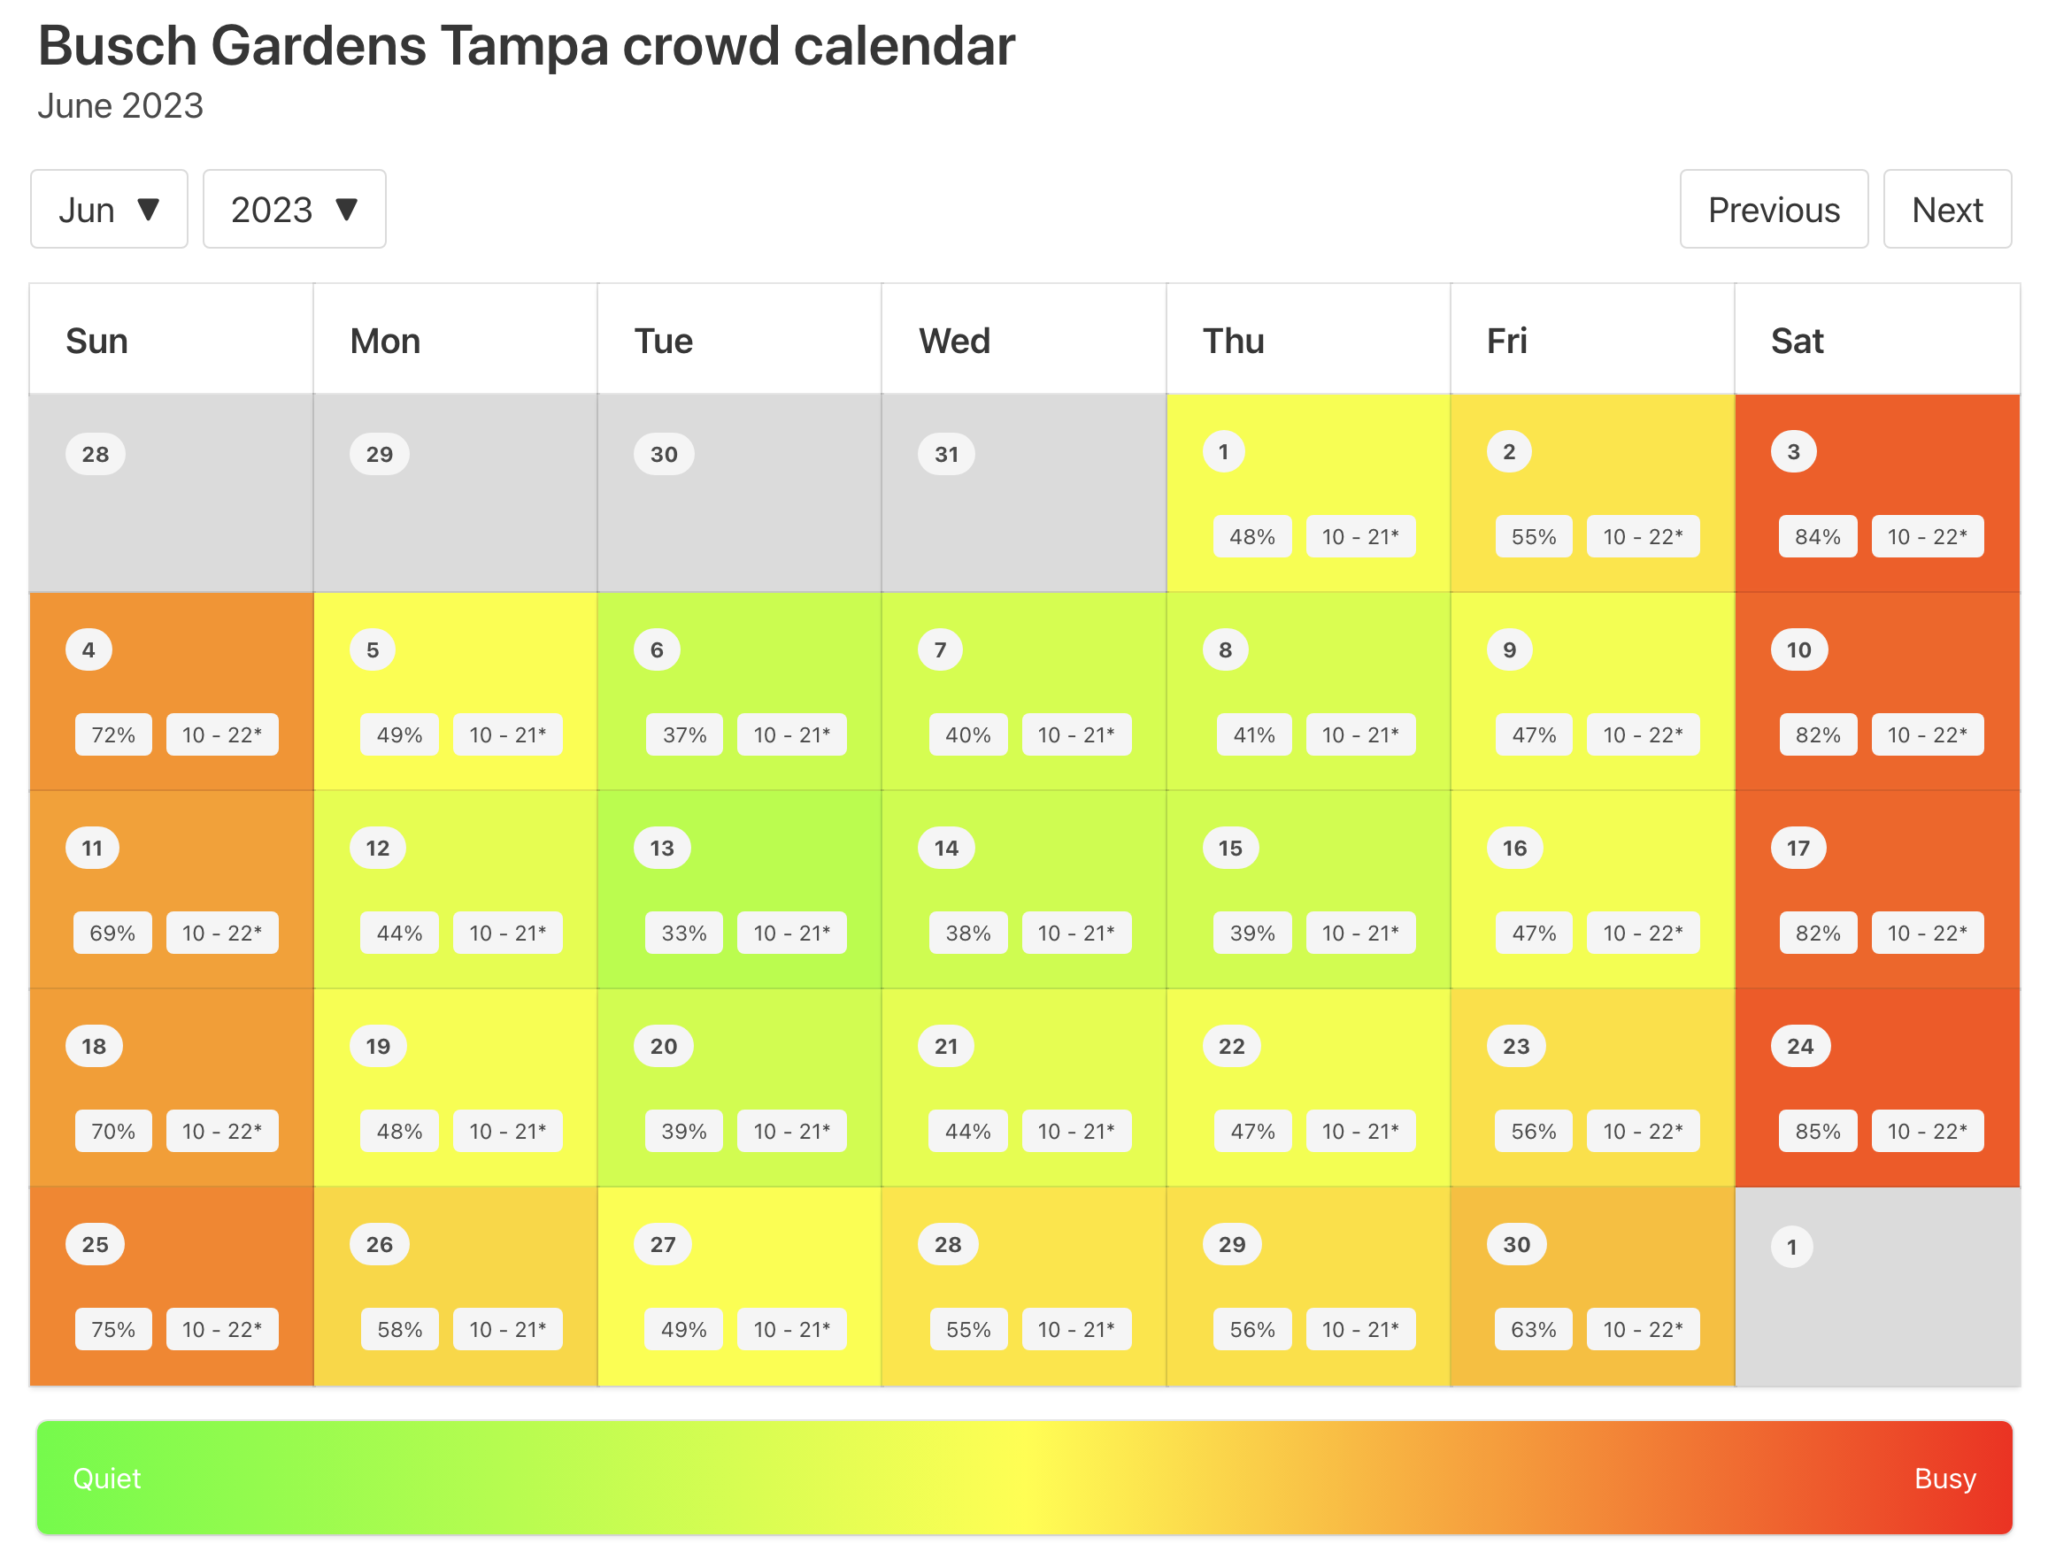 2023-busch-gardens-tampa-crowd-calendar-avoid-the-busy-days-themeparkhipster